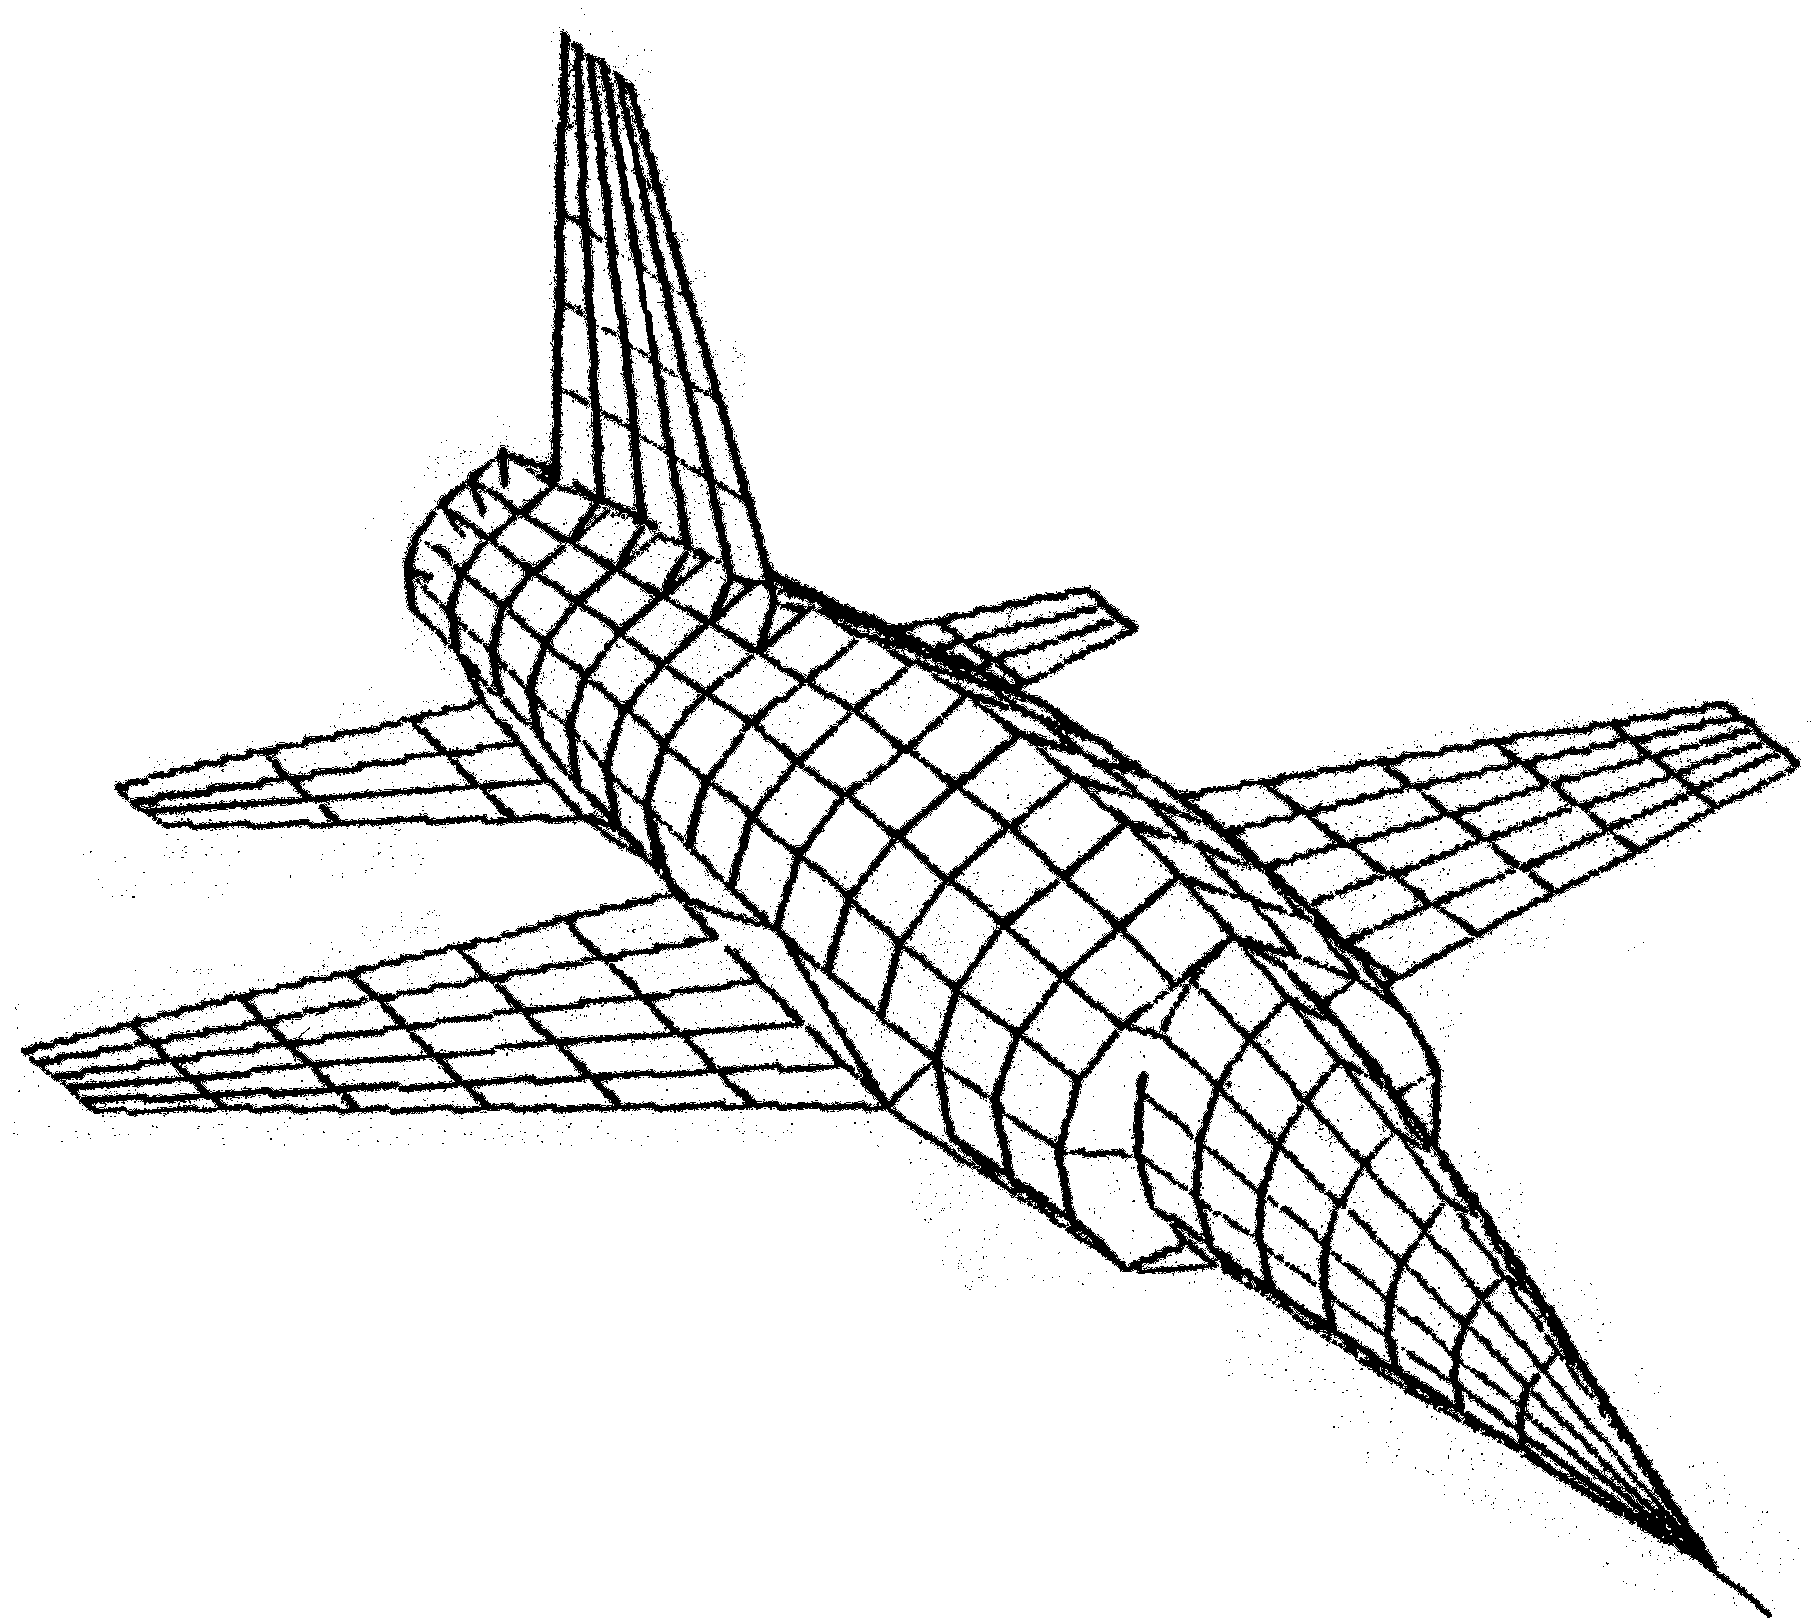 Computer generated line drawing of aircraft. Software developed by Jeremy K. Raines.